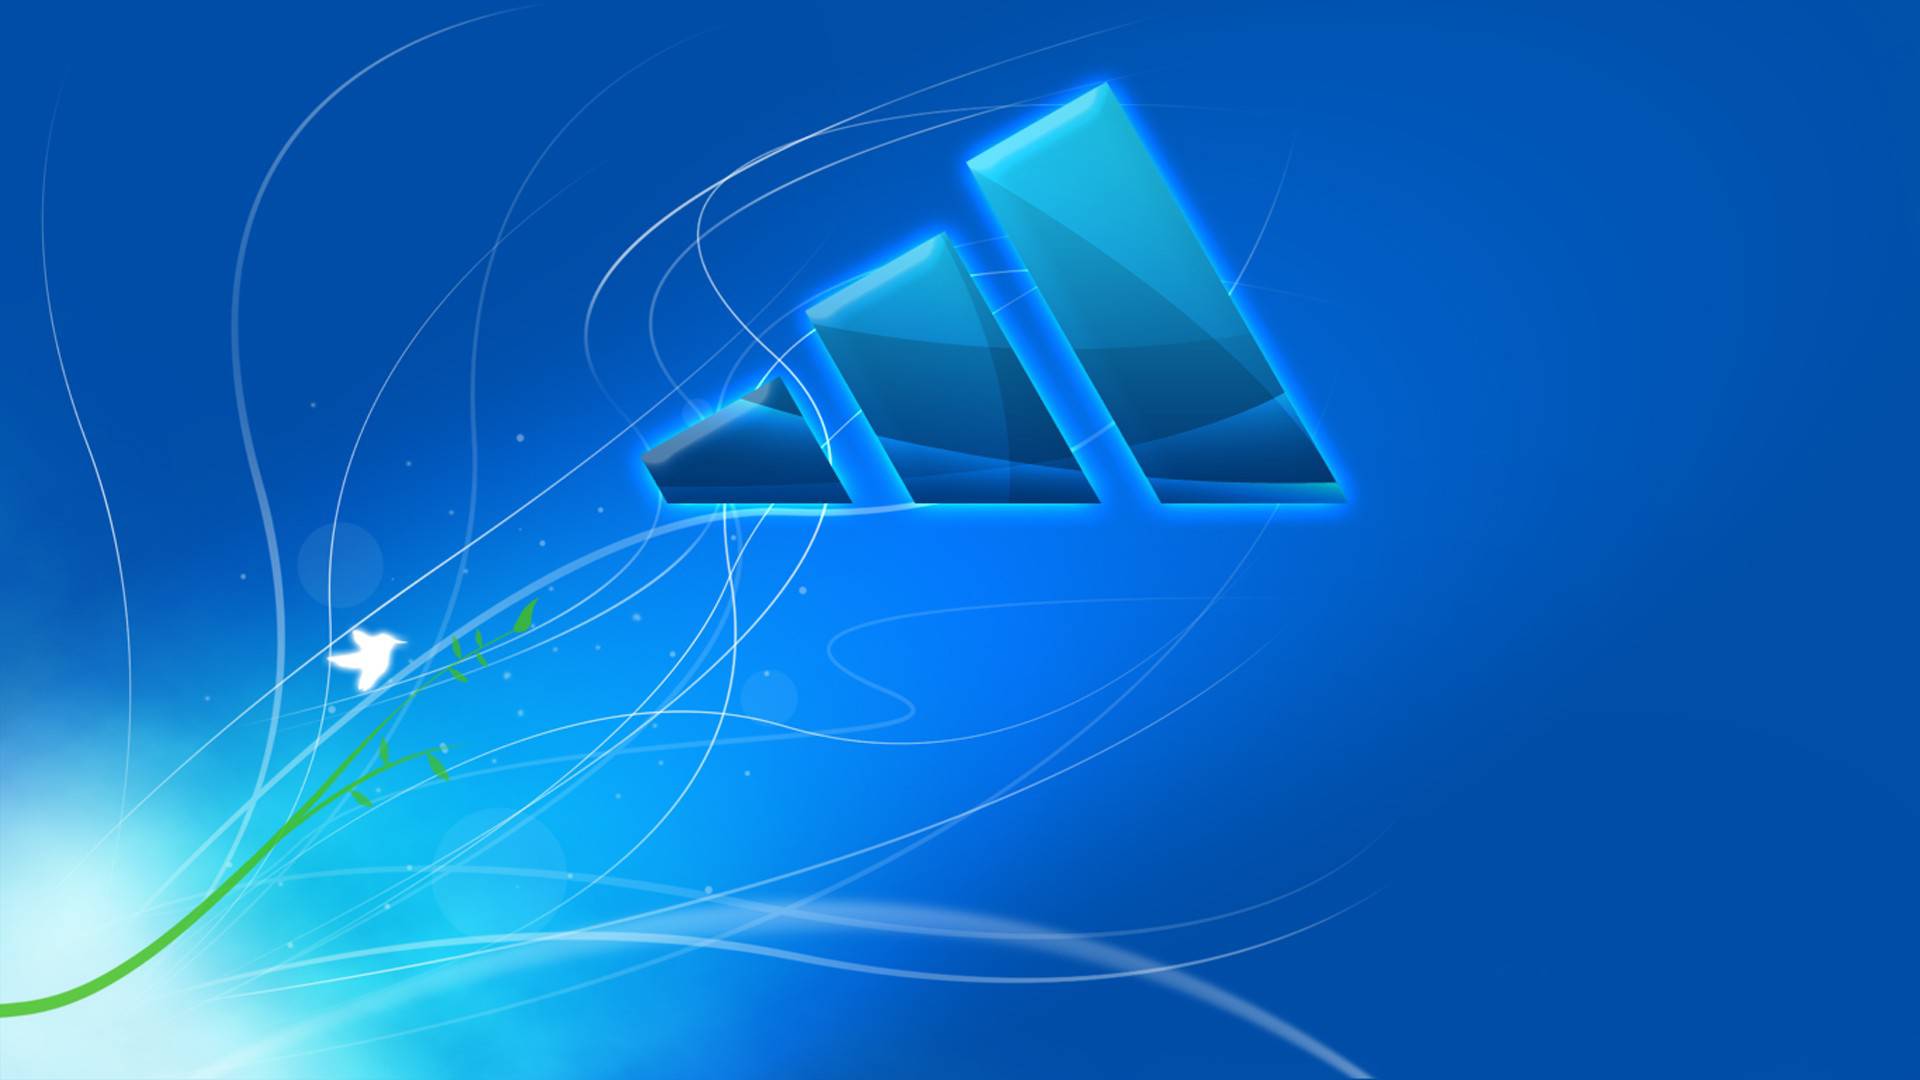 Windows seven wallpaper [10]   23420   High Quality and Resolution